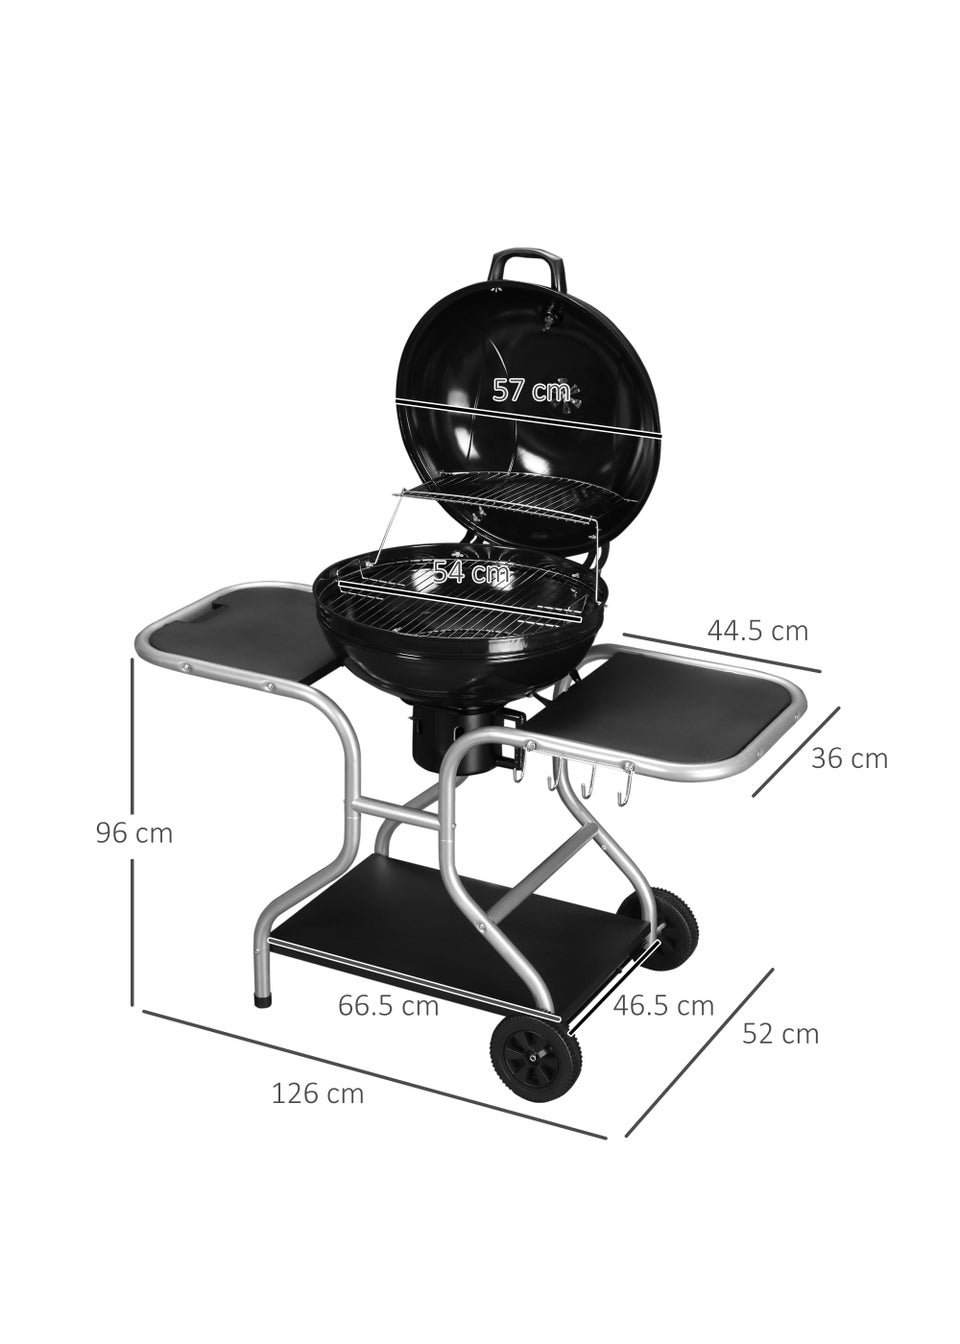 Outsunny Charcoal Trolley Barbecue Grill with Wheels (126cm x 52cm x 96cm)